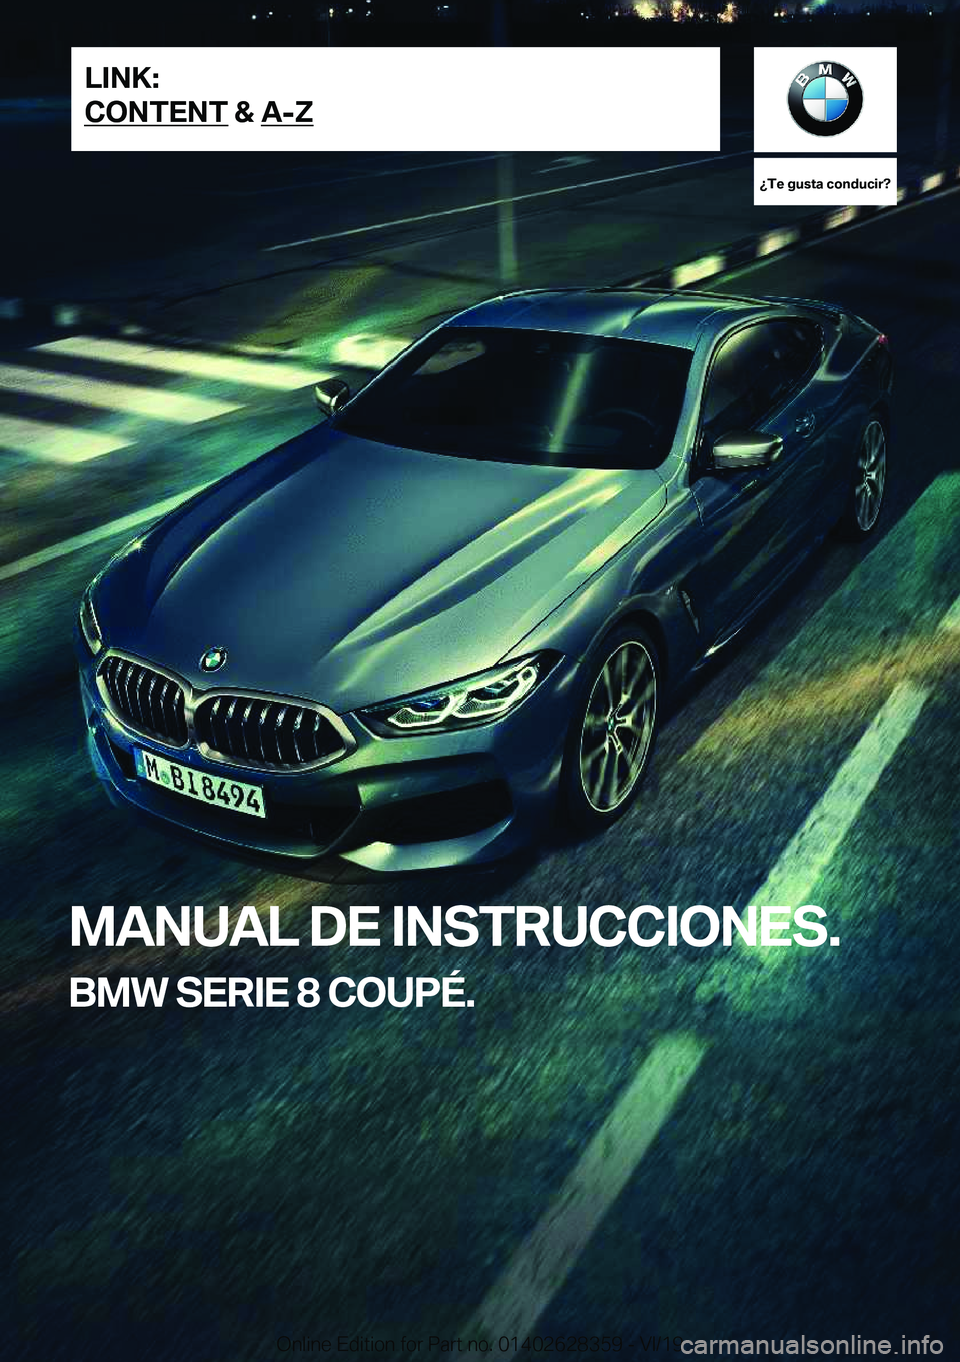 BMW 8 SERIES COUPE 2020  Manuales de Empleo (in Spanish) ��T�e��g�u�s�t�a��c�o�n�d�u�c�i�r� 
�M�A�N�U�A�L��D�E��I�N�S�T�R�U�C�C�I�O�N�E�S�.
�B�M�W��S�E�R�I�E��8��C�O�U�P�